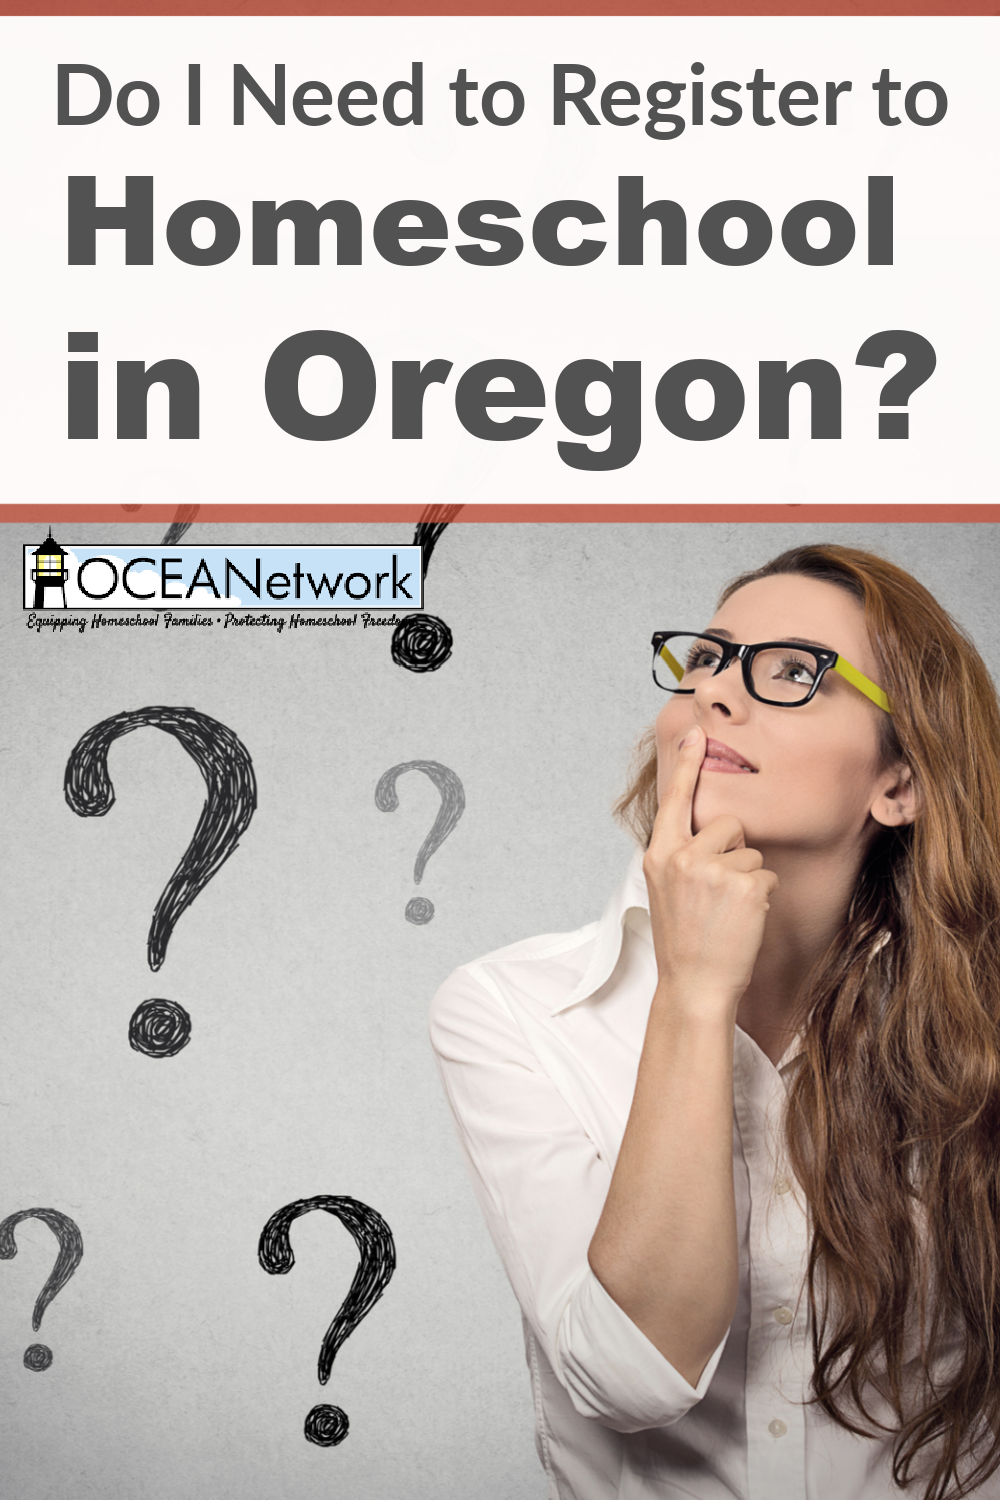 Oregon homeschool parents are NOT required to register to homeschool, but they are instead to send in a letter of their intent to homeschool.